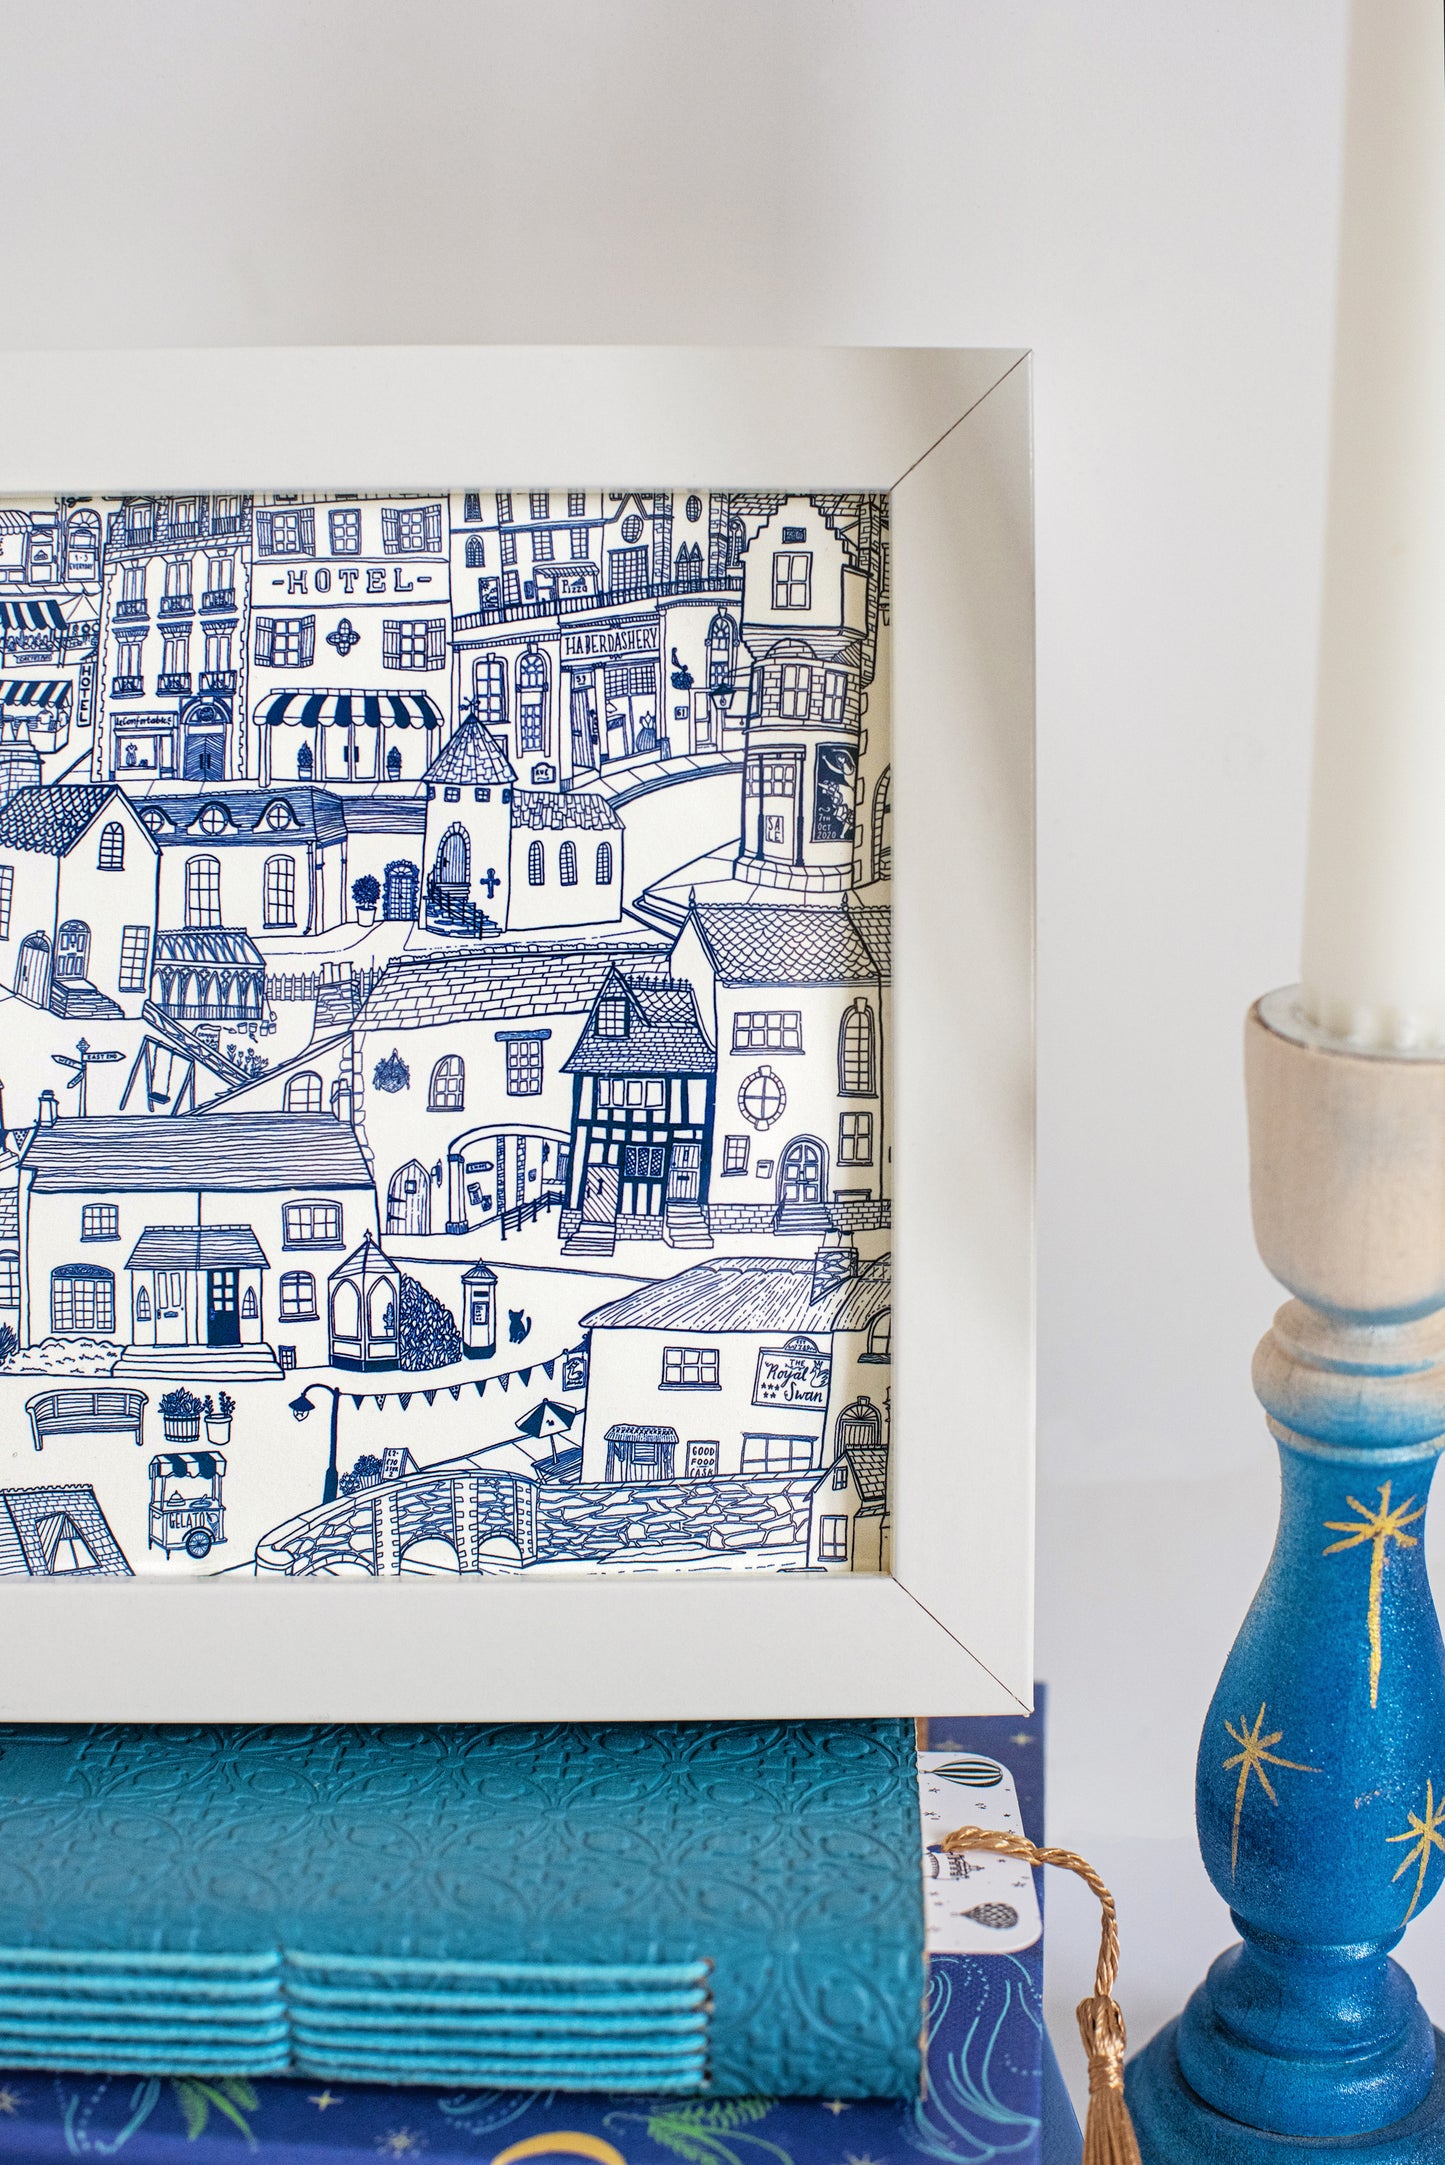 A closeup of the print in its white frame, a blue illustration of a tiny imagined town.